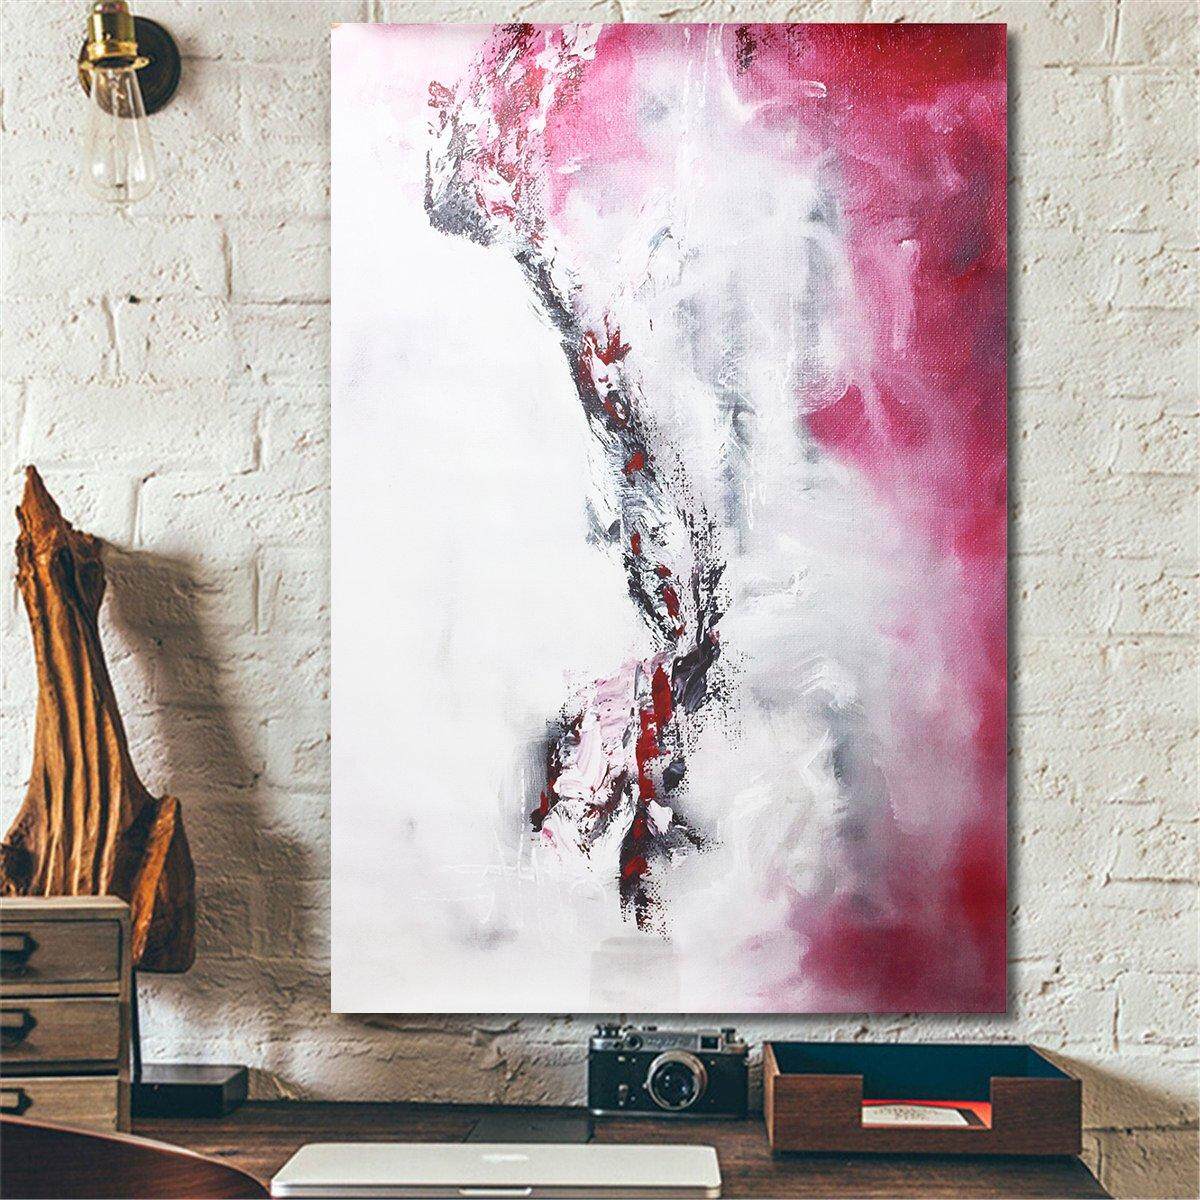 GUDI-Huge Fashion Hand Drawing Modern Abstract Painting Home Deco Canvas Art # 150x75cm